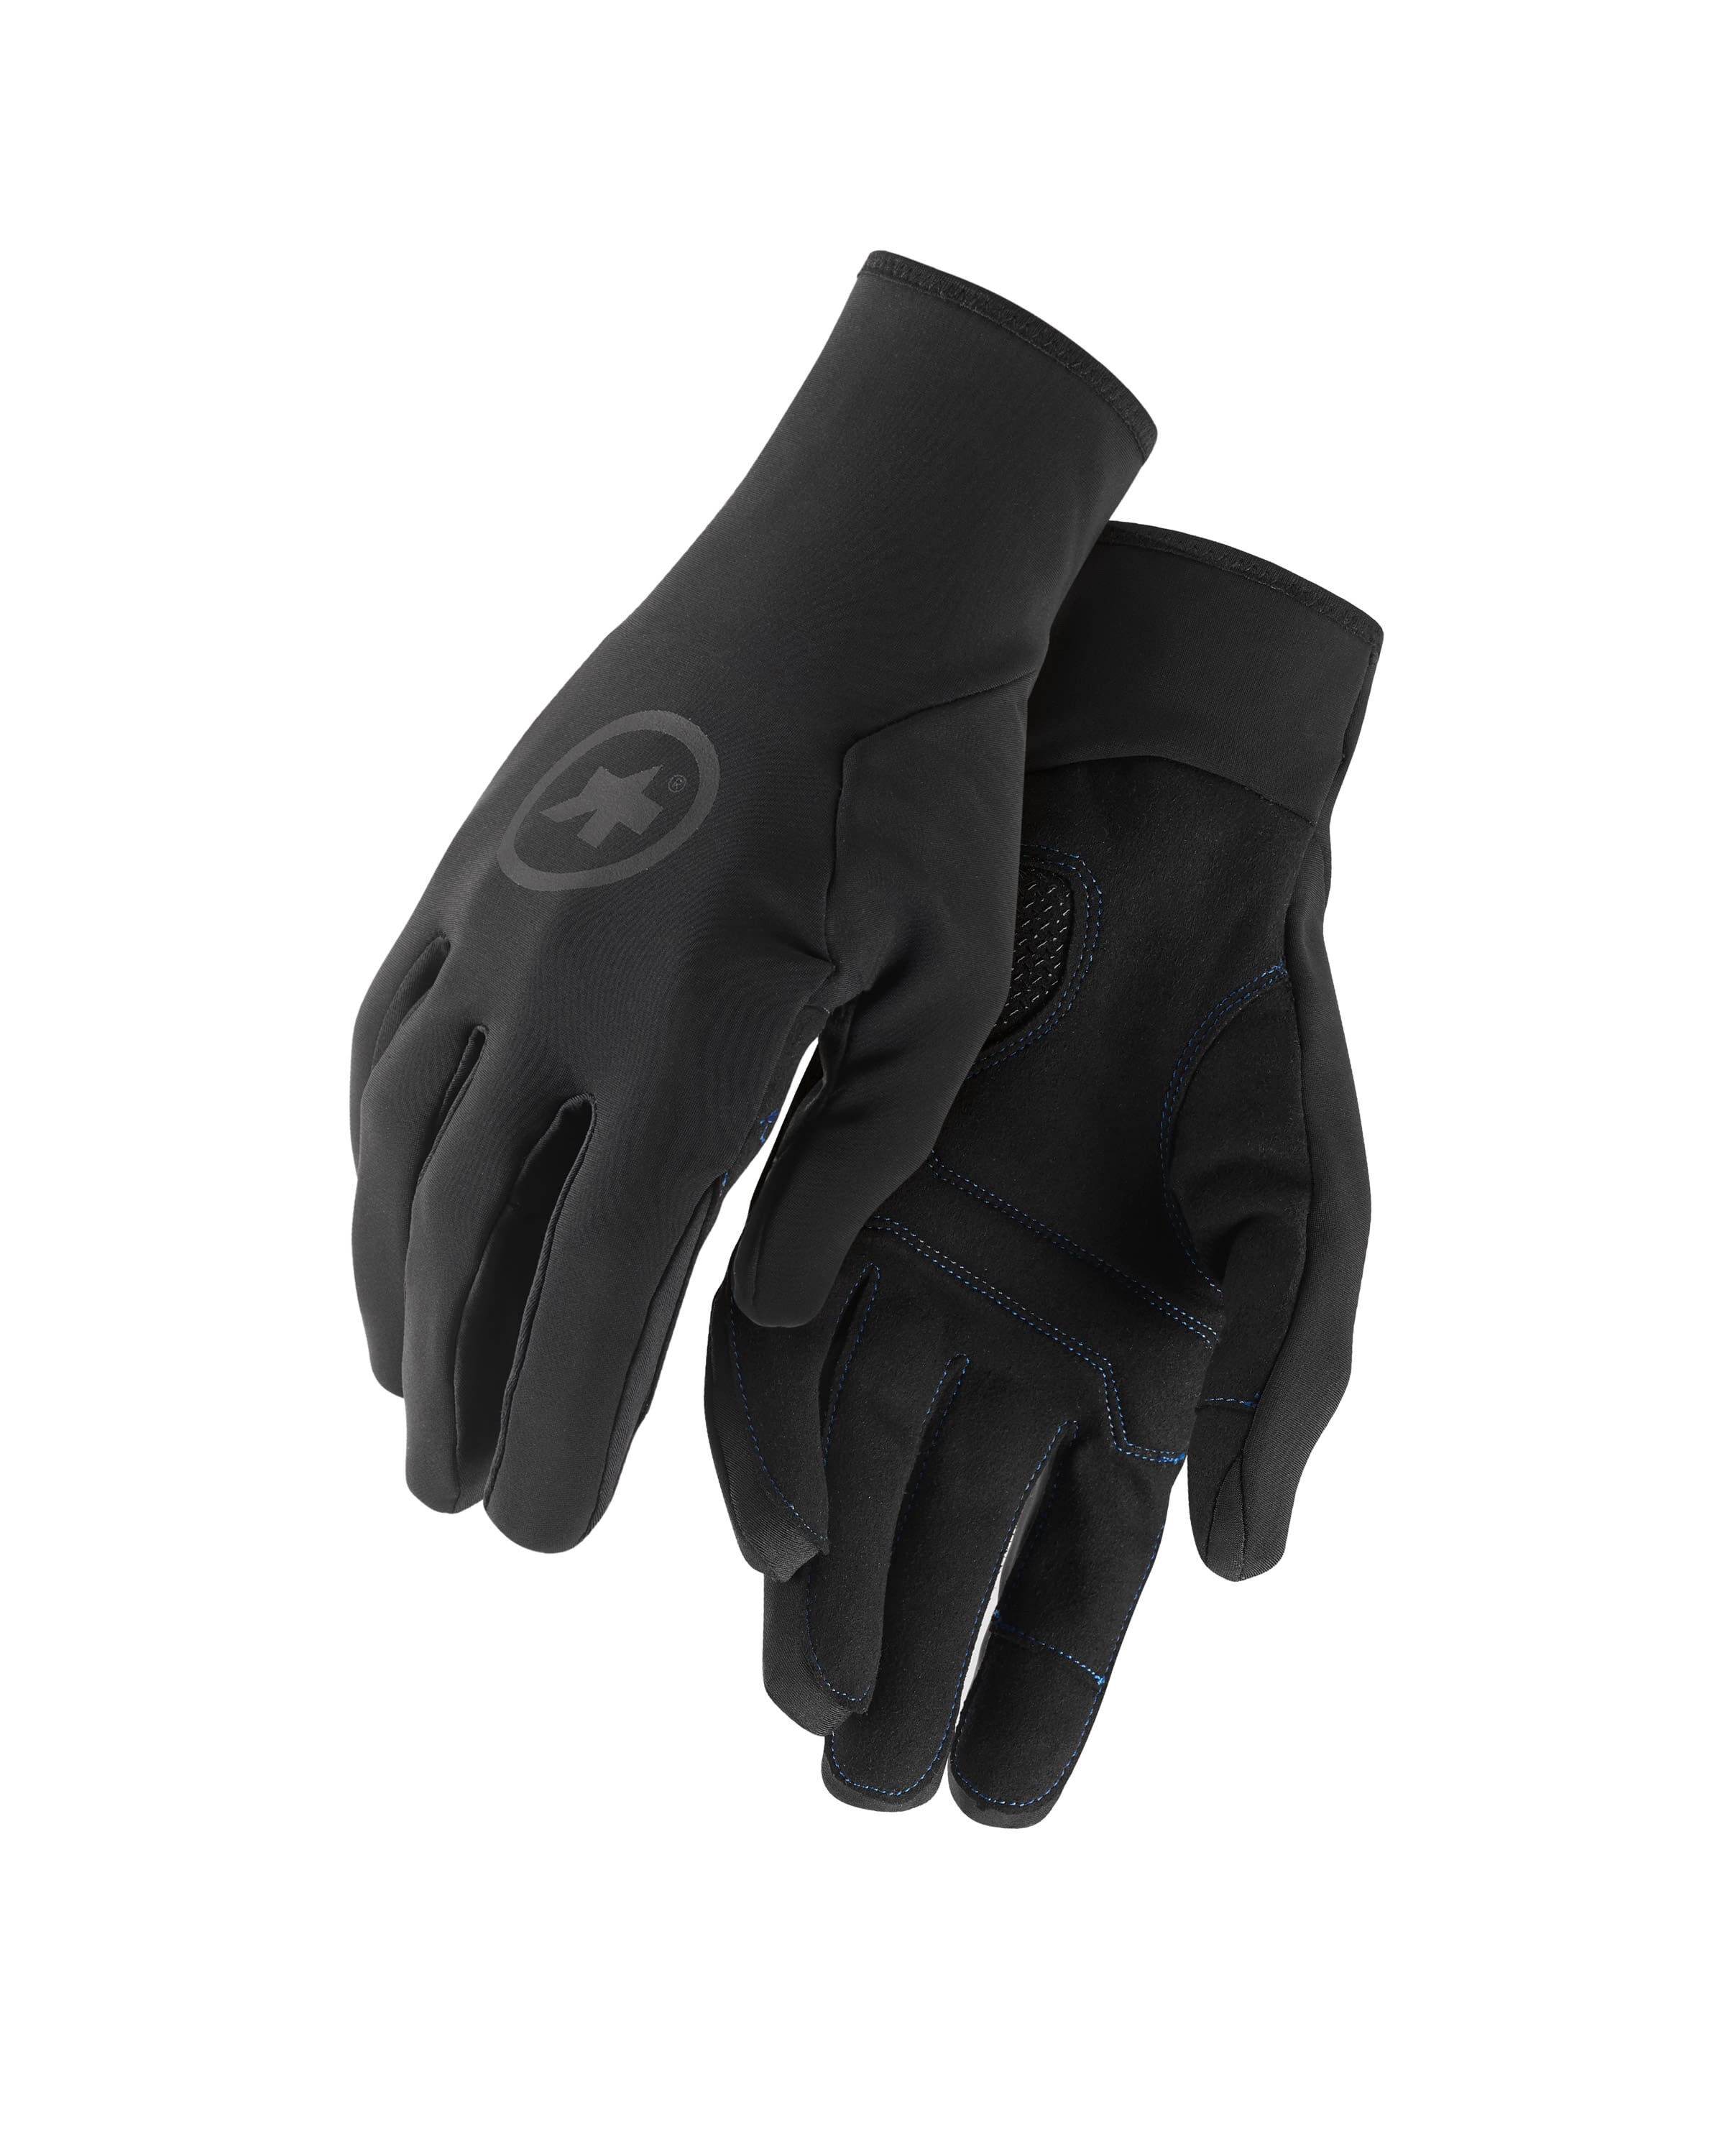 Assos Winter Gloves - Cycling gloves